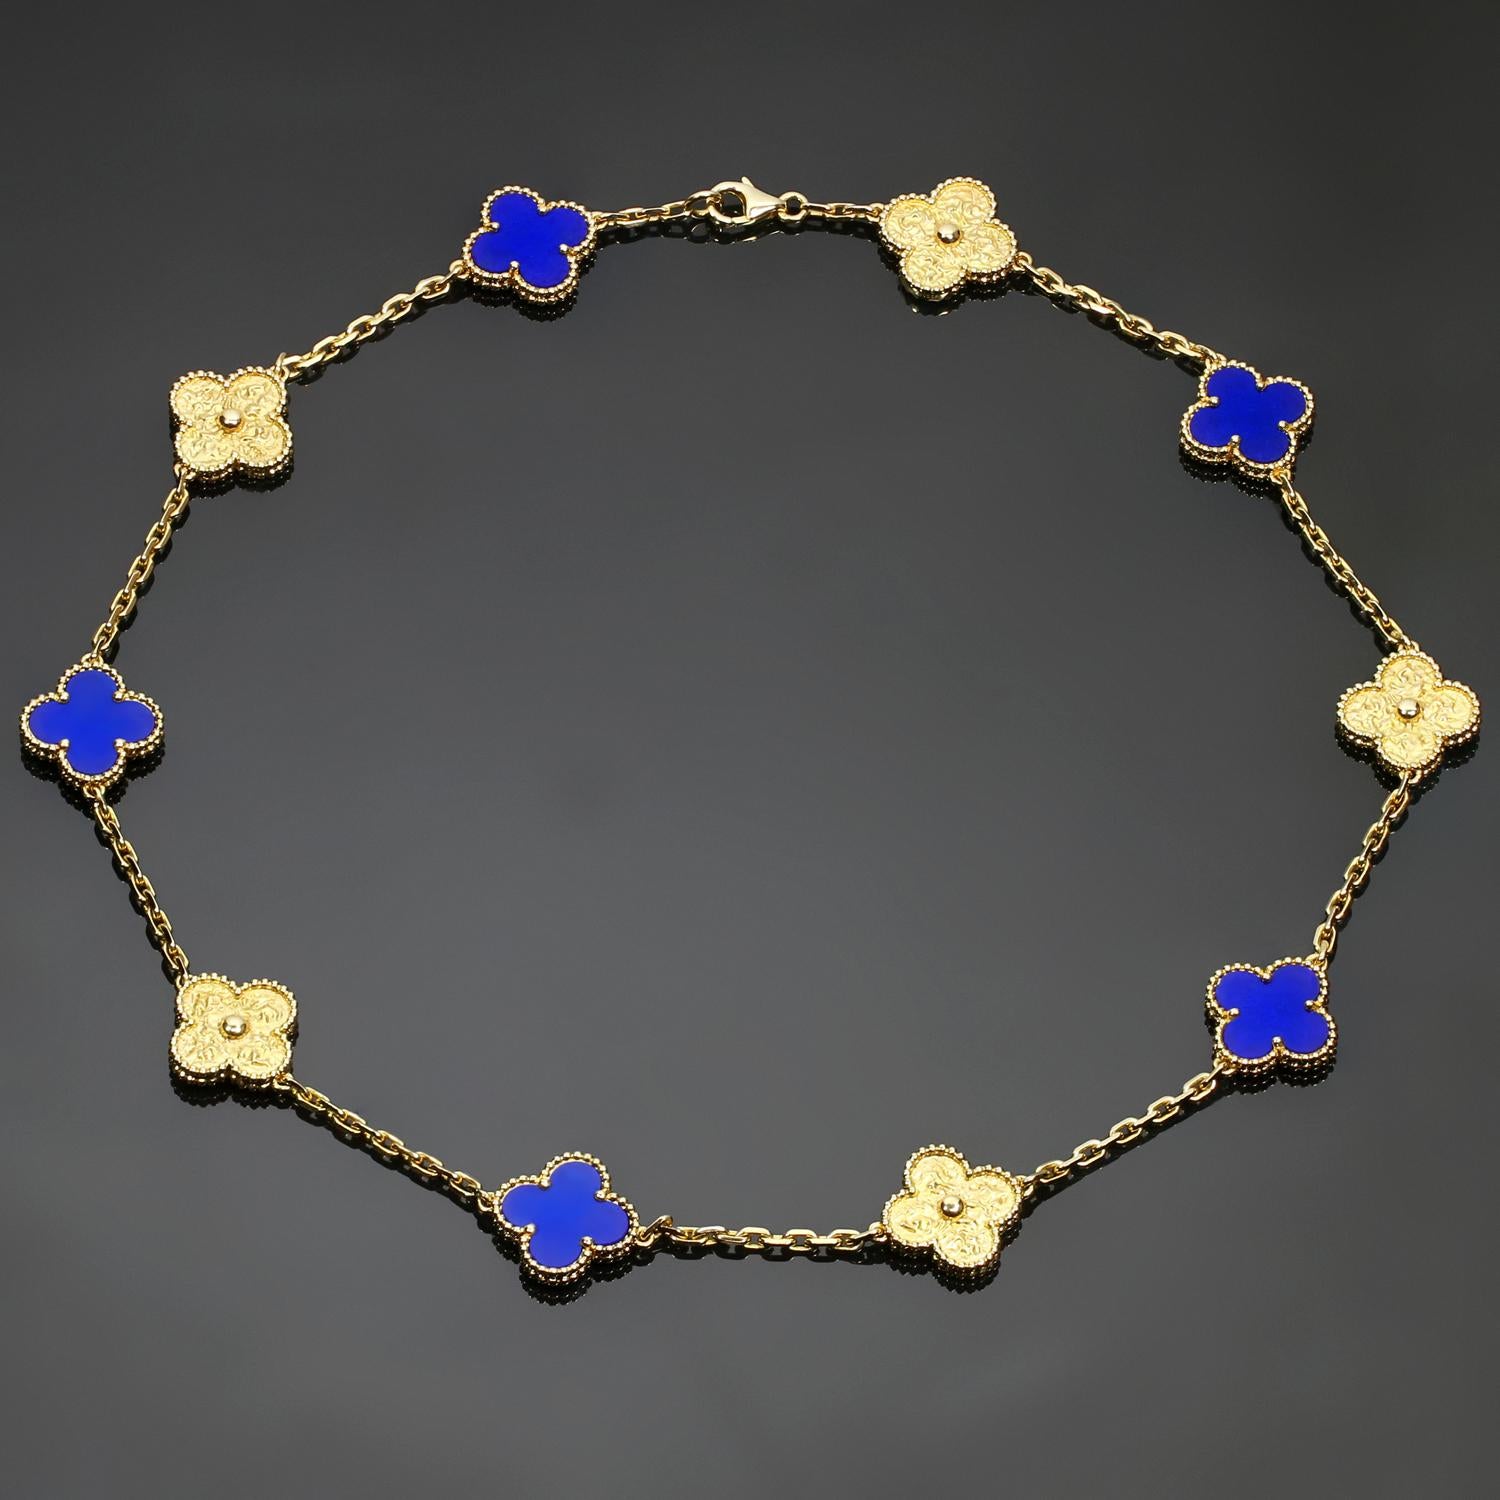 This rare and fabulous Van Cleef & Arpels necklace from the iconic Vintage Alhambra collection features 10 lucky clover motifs crafted in textured 18k yellow gold and inlaid with lapis lazuli in five of the charms. Made in France circa 2010s.